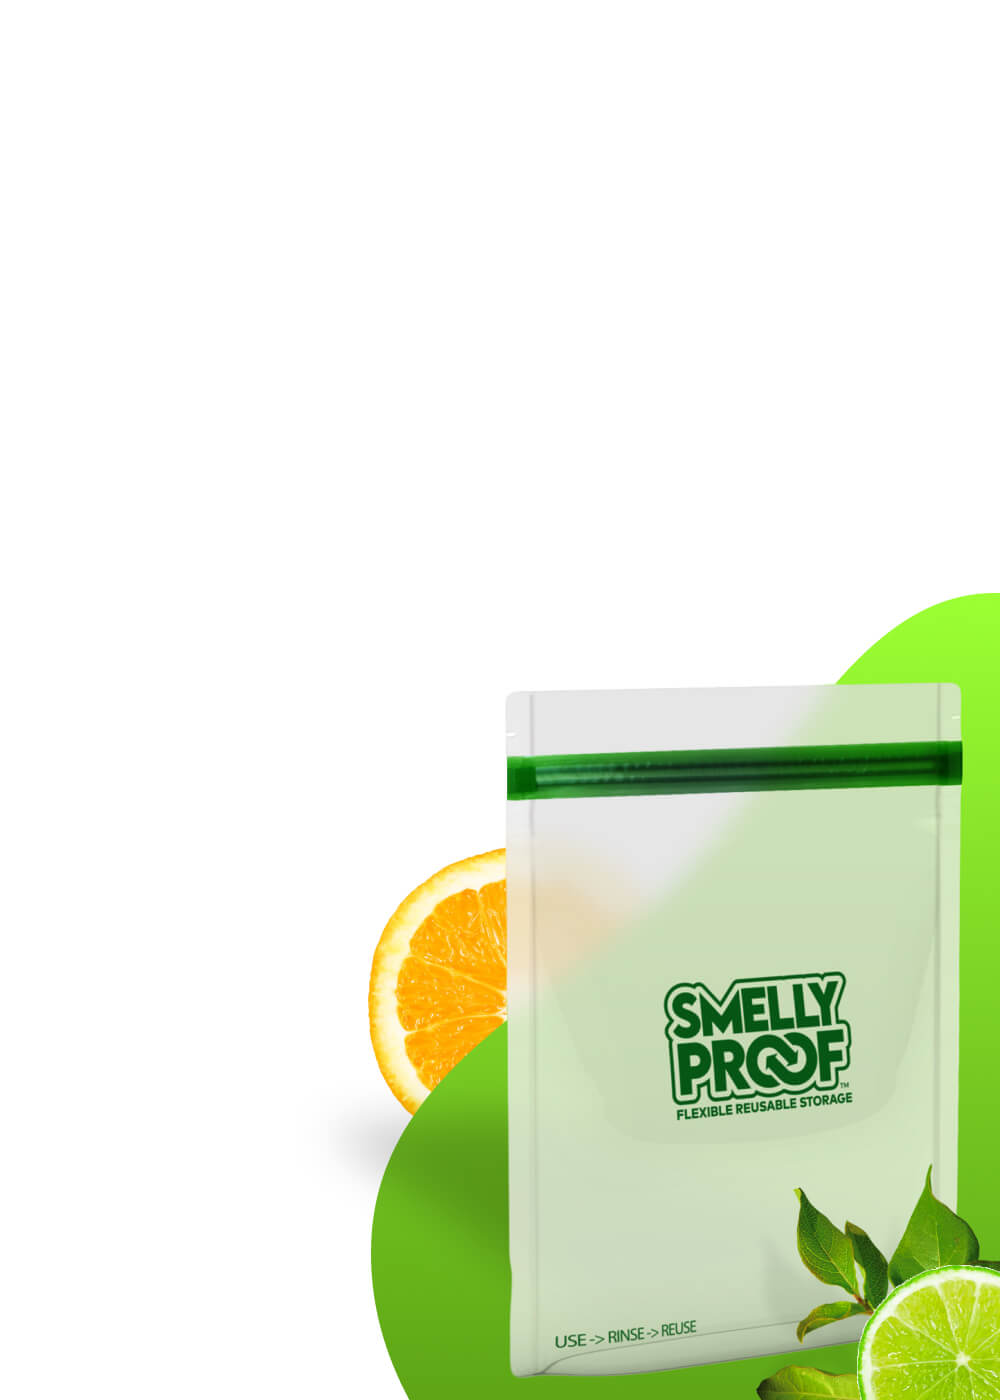 Smell Proof Ziplock Bags for Sale That Are Reusable On a Green Background with Lime and Orange Around It